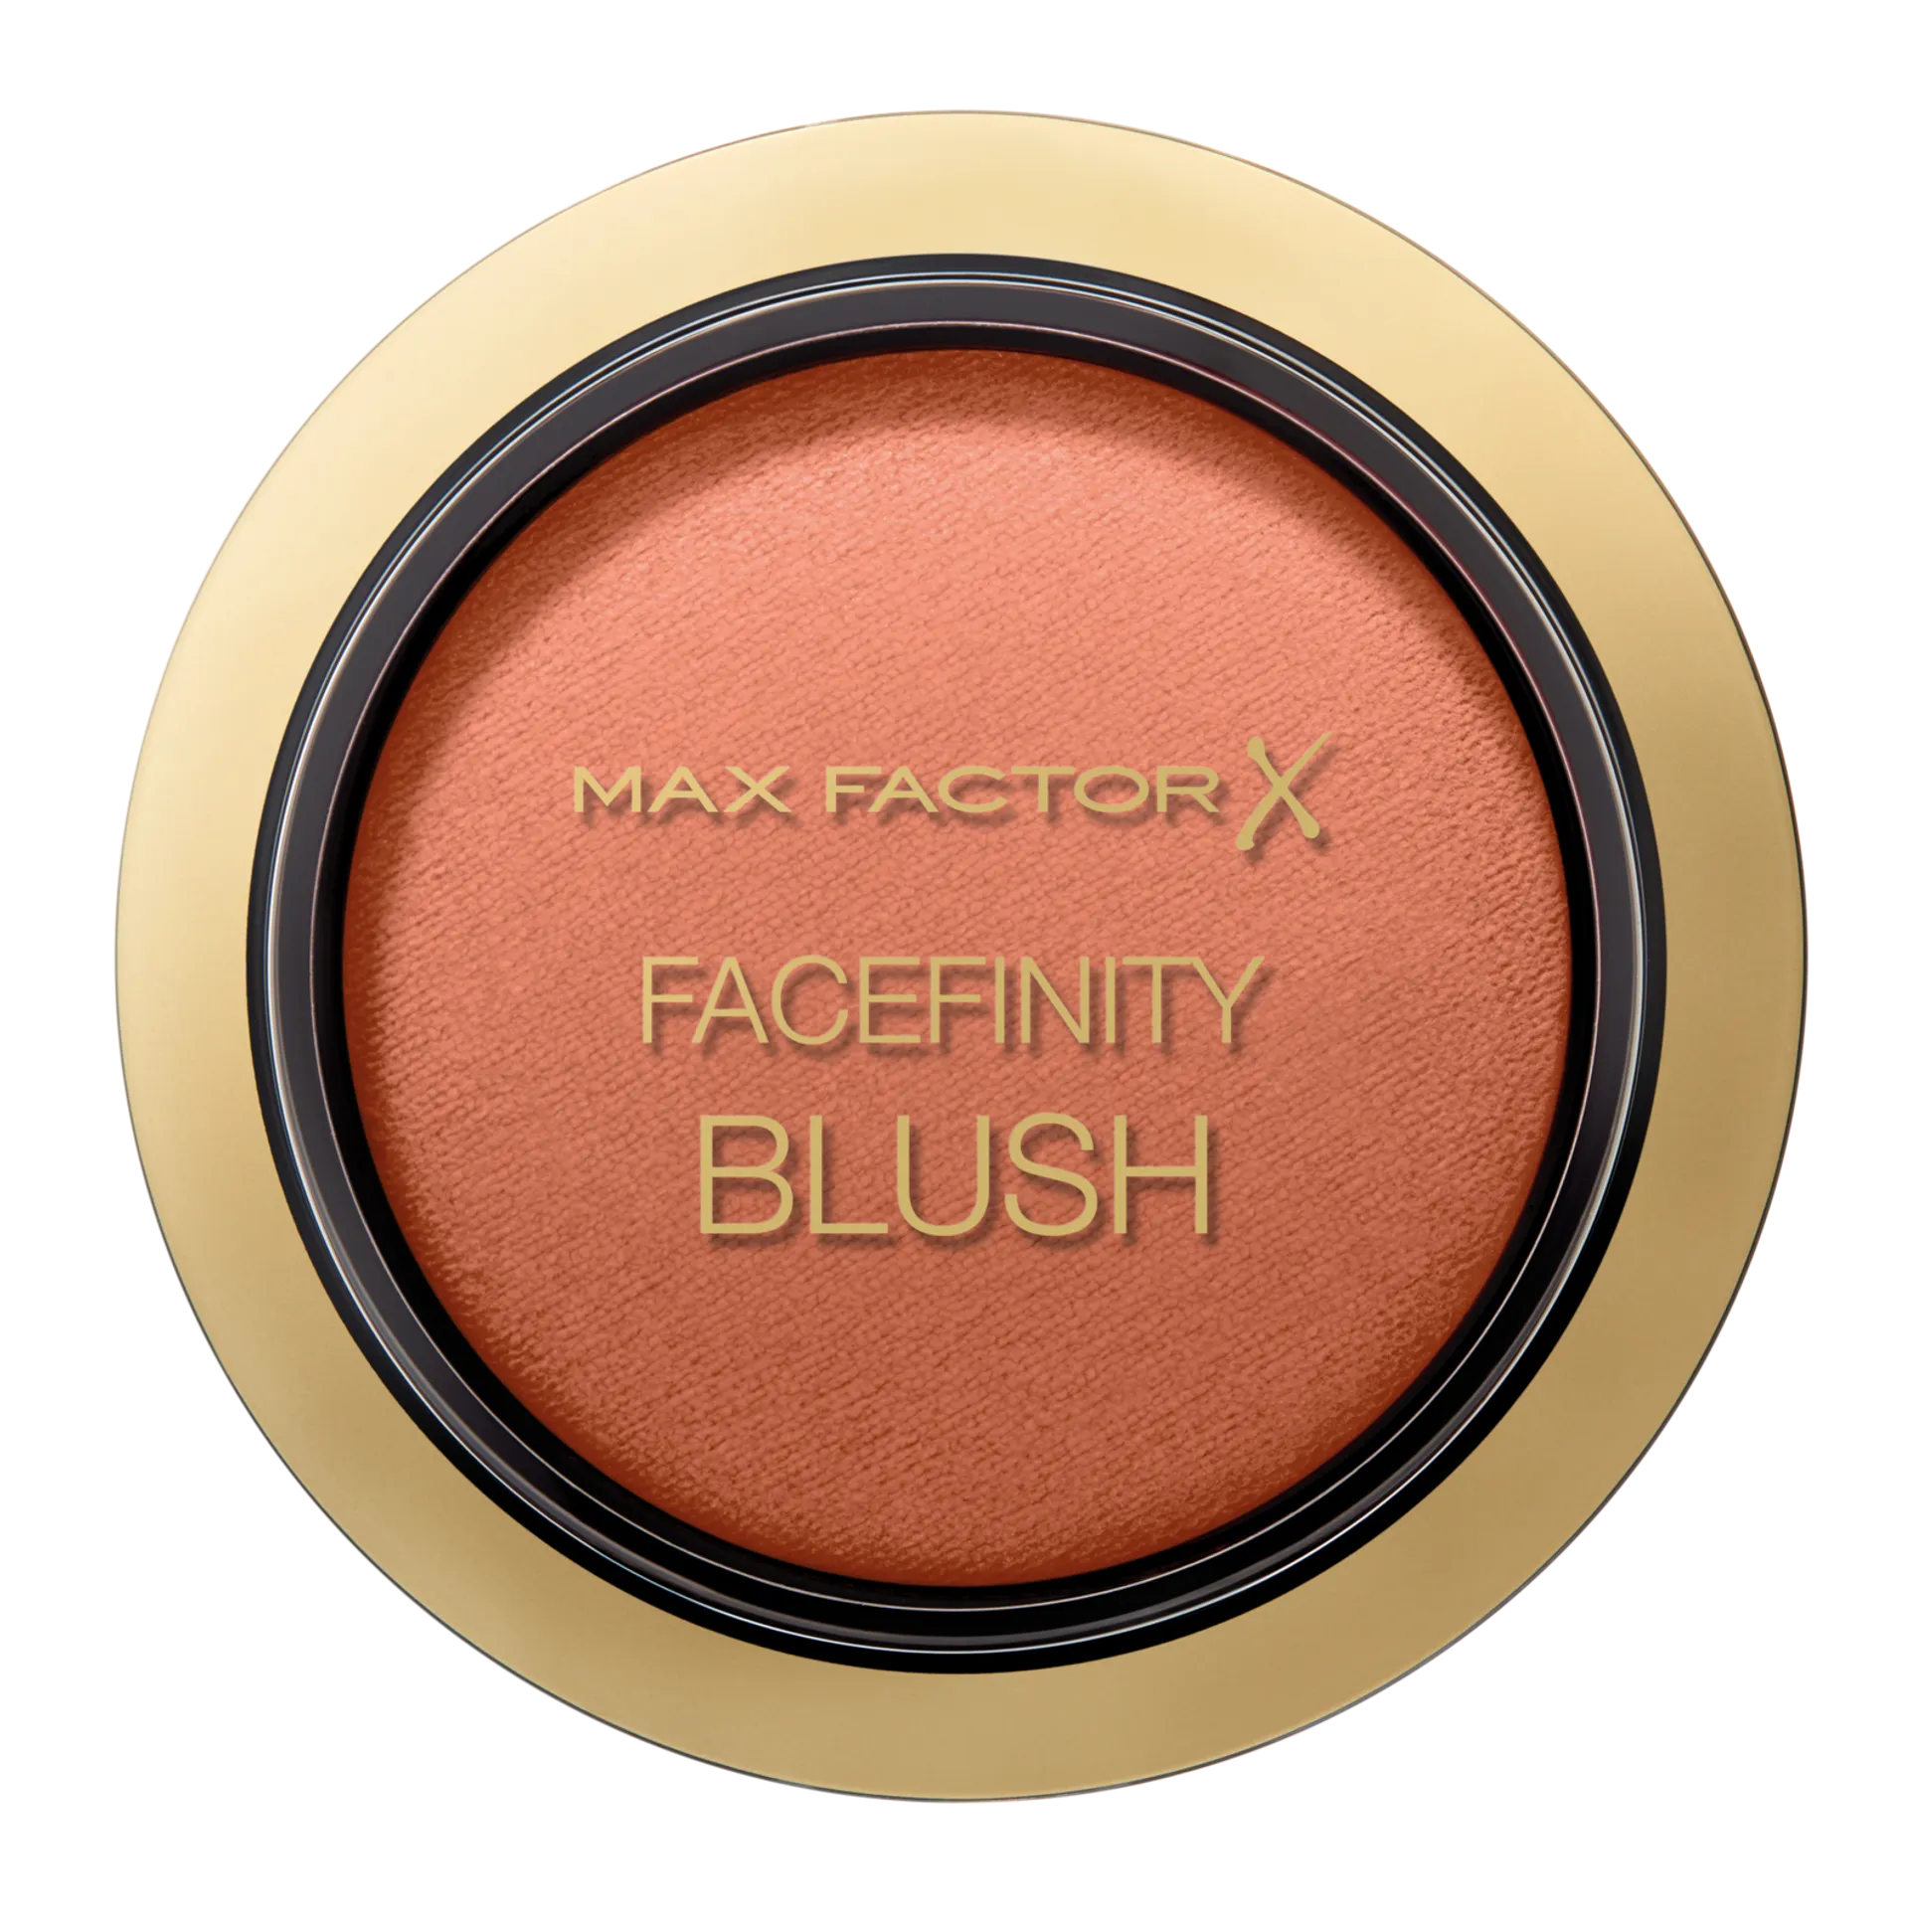 Max Factor Facefinity Blush 40 Delicate Apricot 1,5 g poskipuna